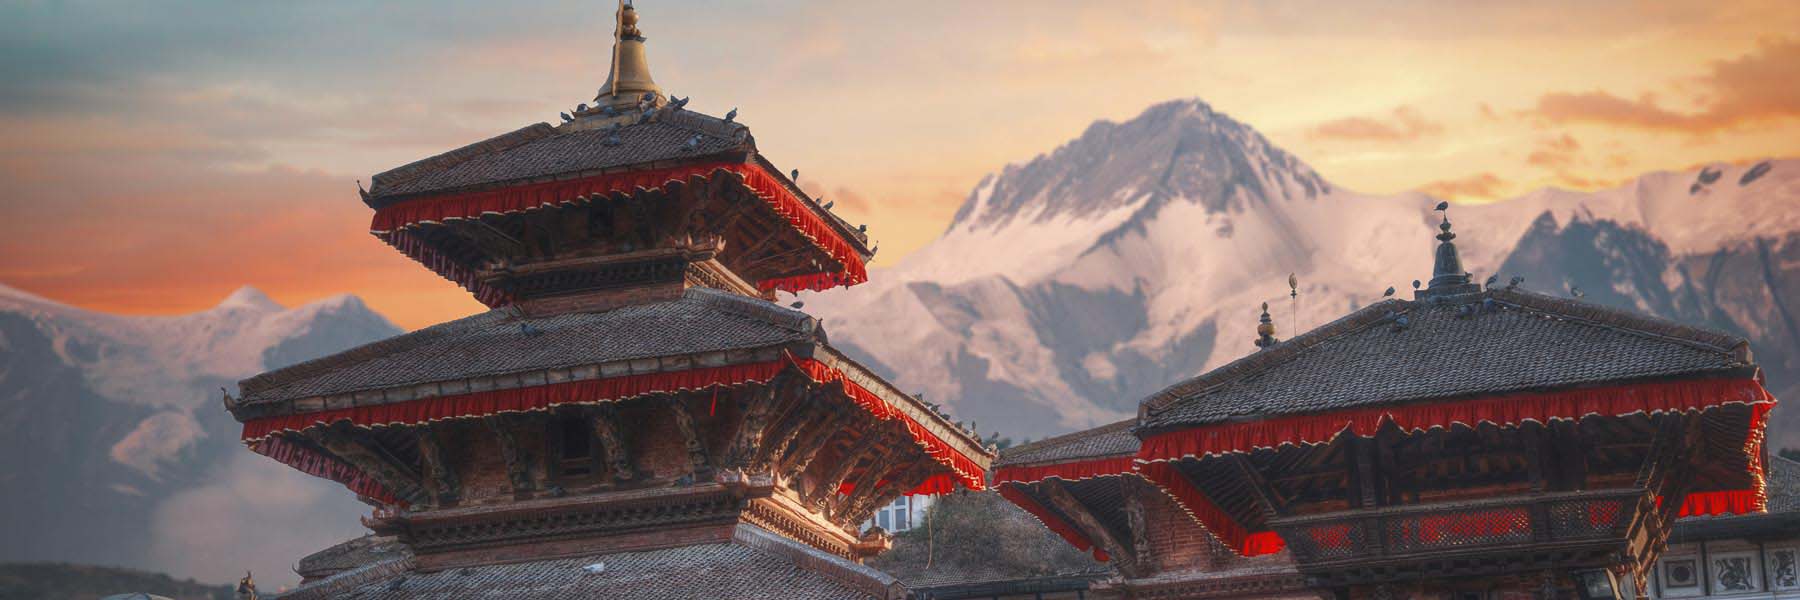 Nepal Tour Packages 